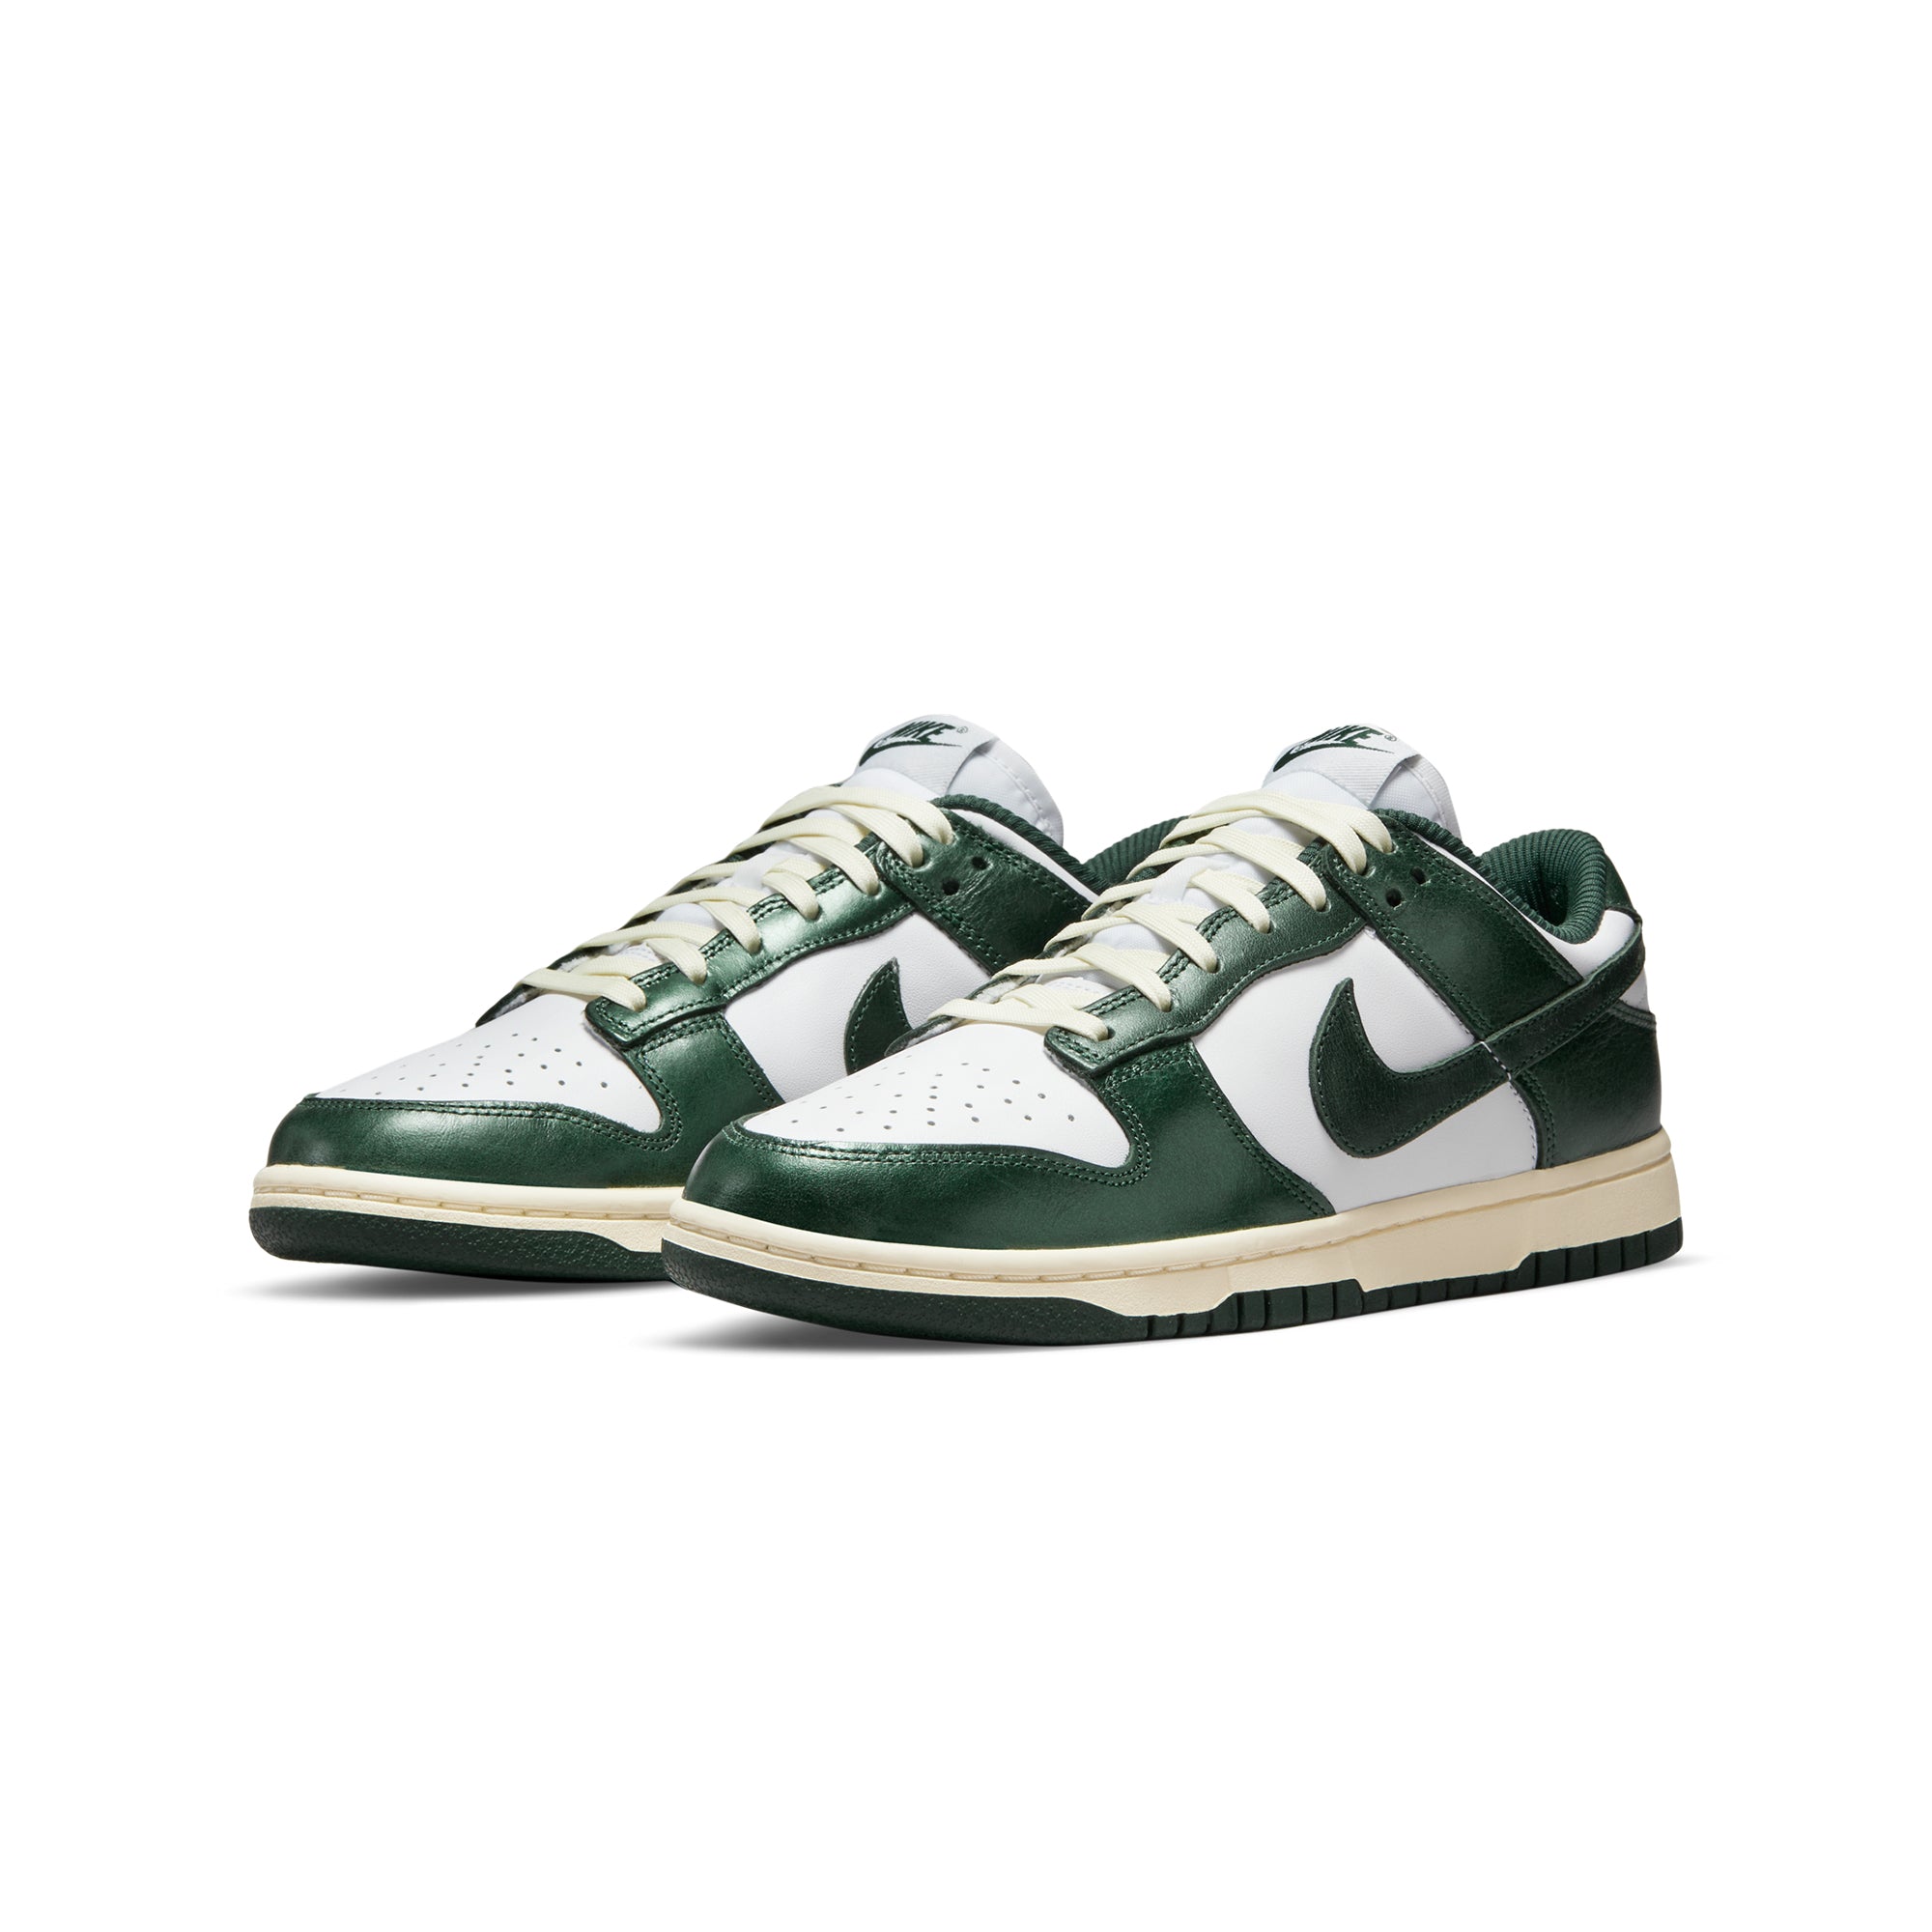 Nike Womens Dunk Low Vintage Green Shoes - 5.5